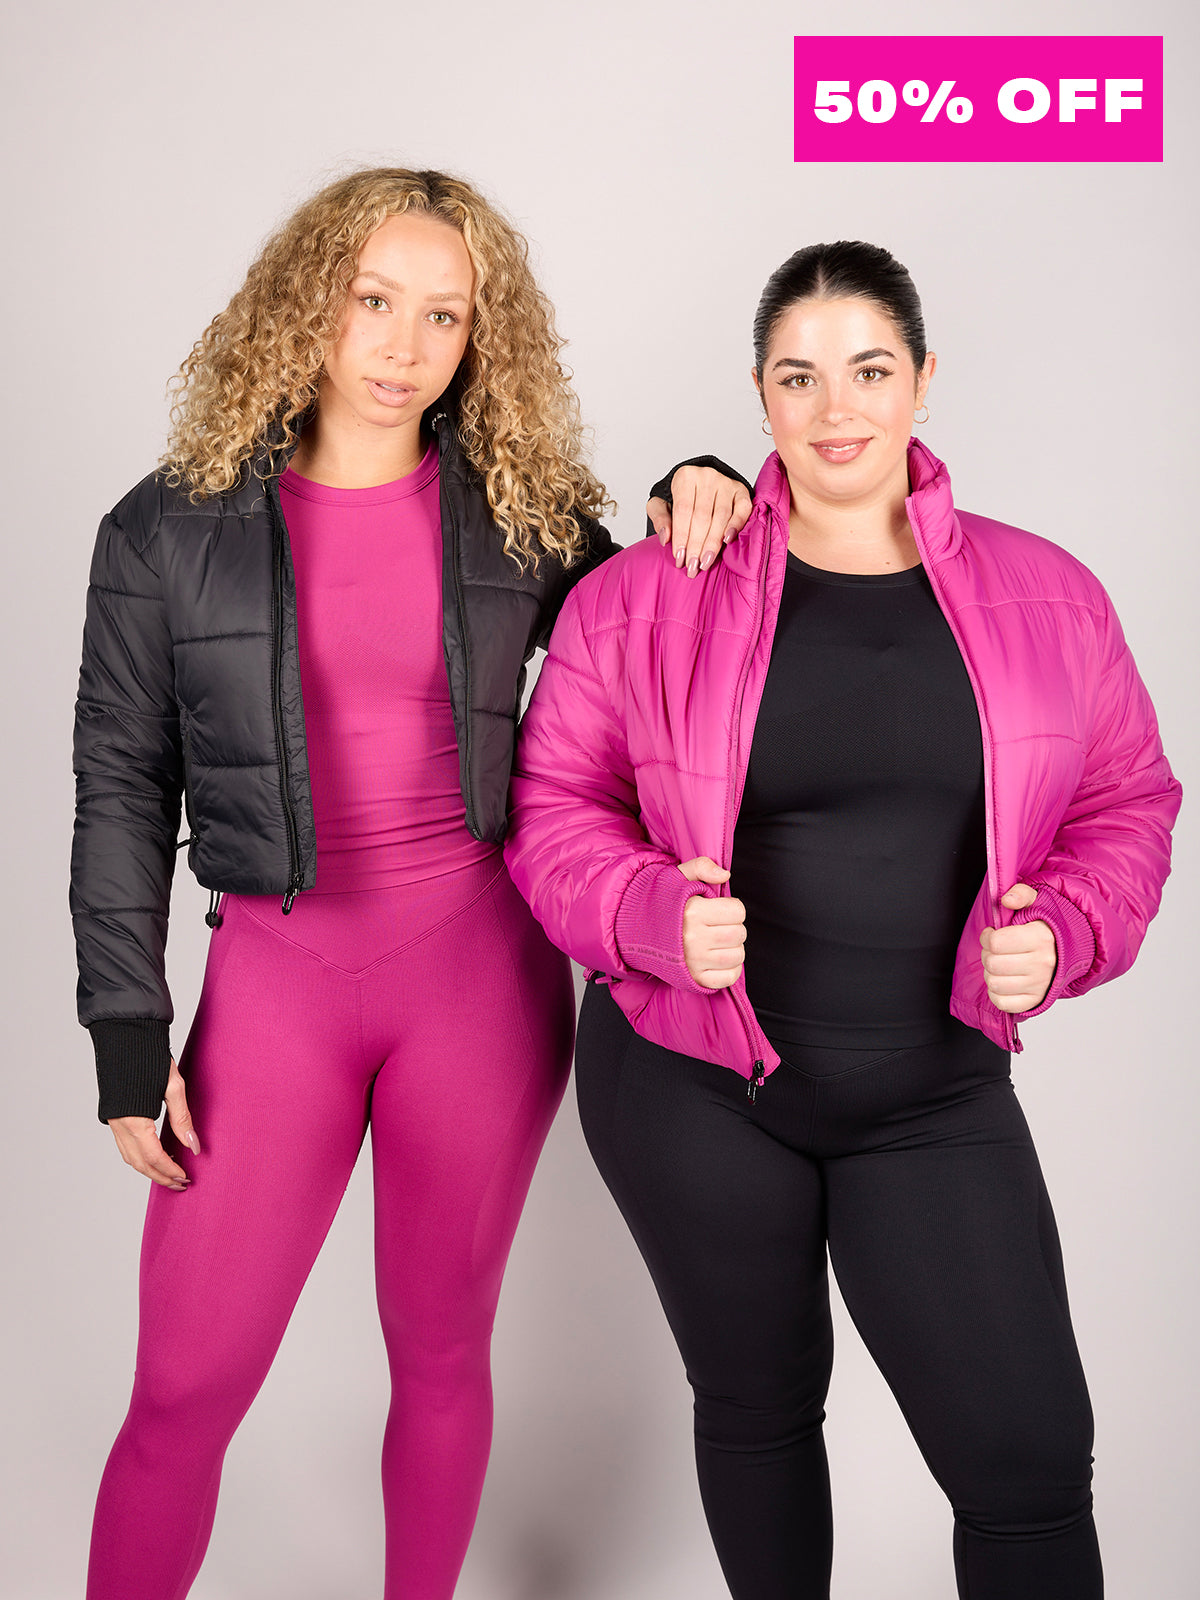 SHEFIT Women's Clothing On Sale Up To 90% Off Retail